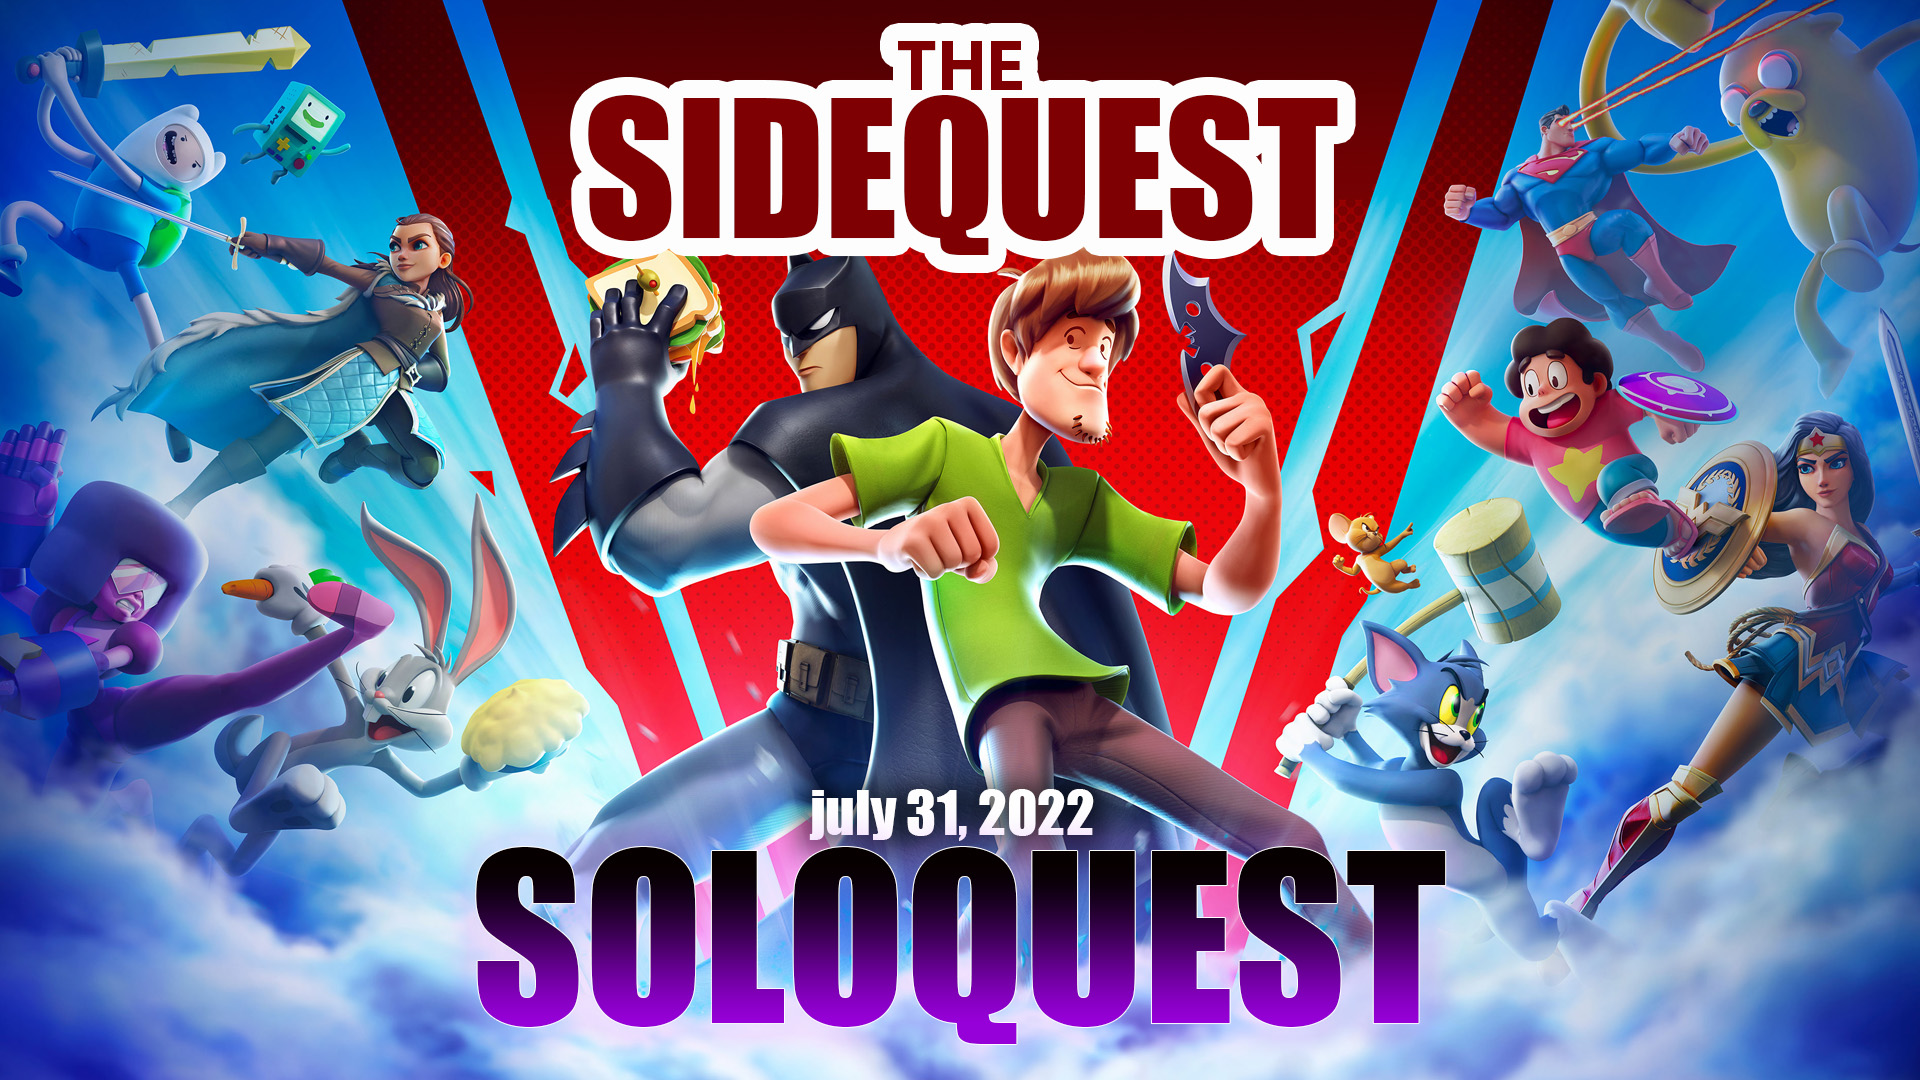 The SideQuest LIVE! July 31, 2022: SoloQuest